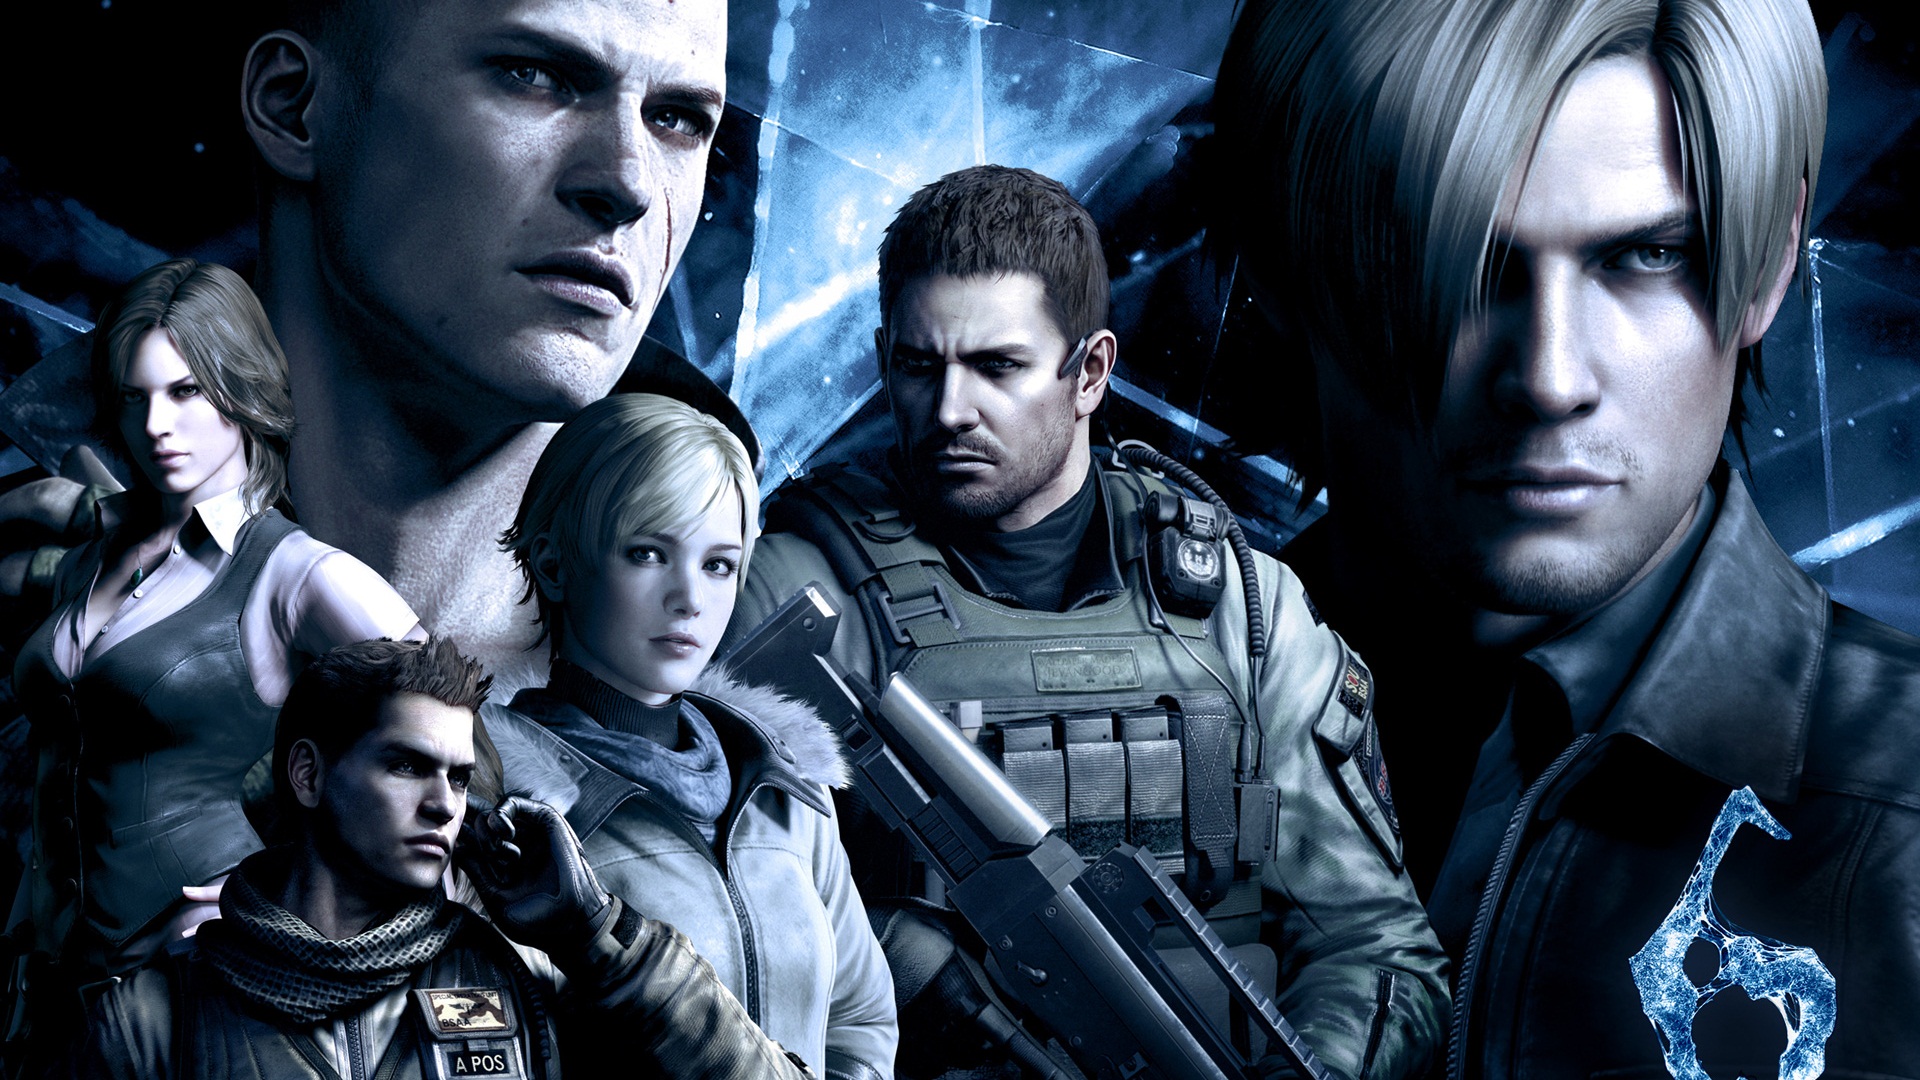 Resident Evil 6 HD game wallpapers #9 - 1920x1080